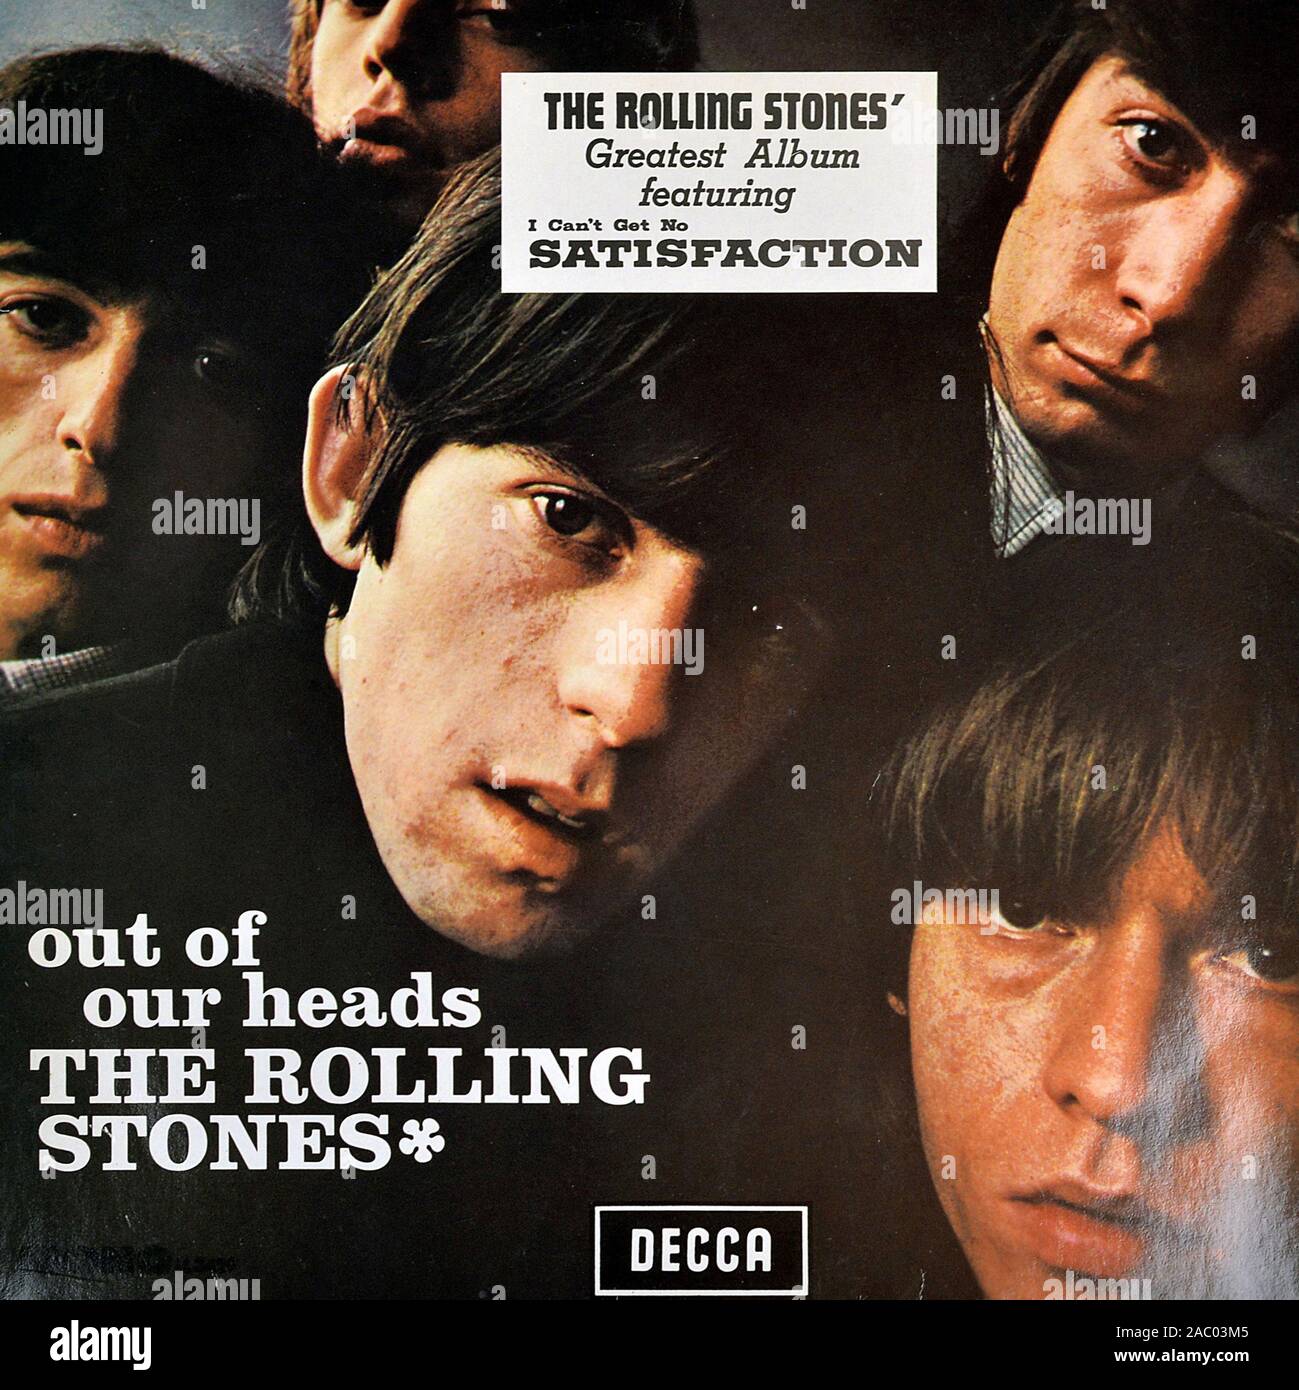 ROLLING STONES Out of our Heads   - Vintage vinyl album cover Stock Photo